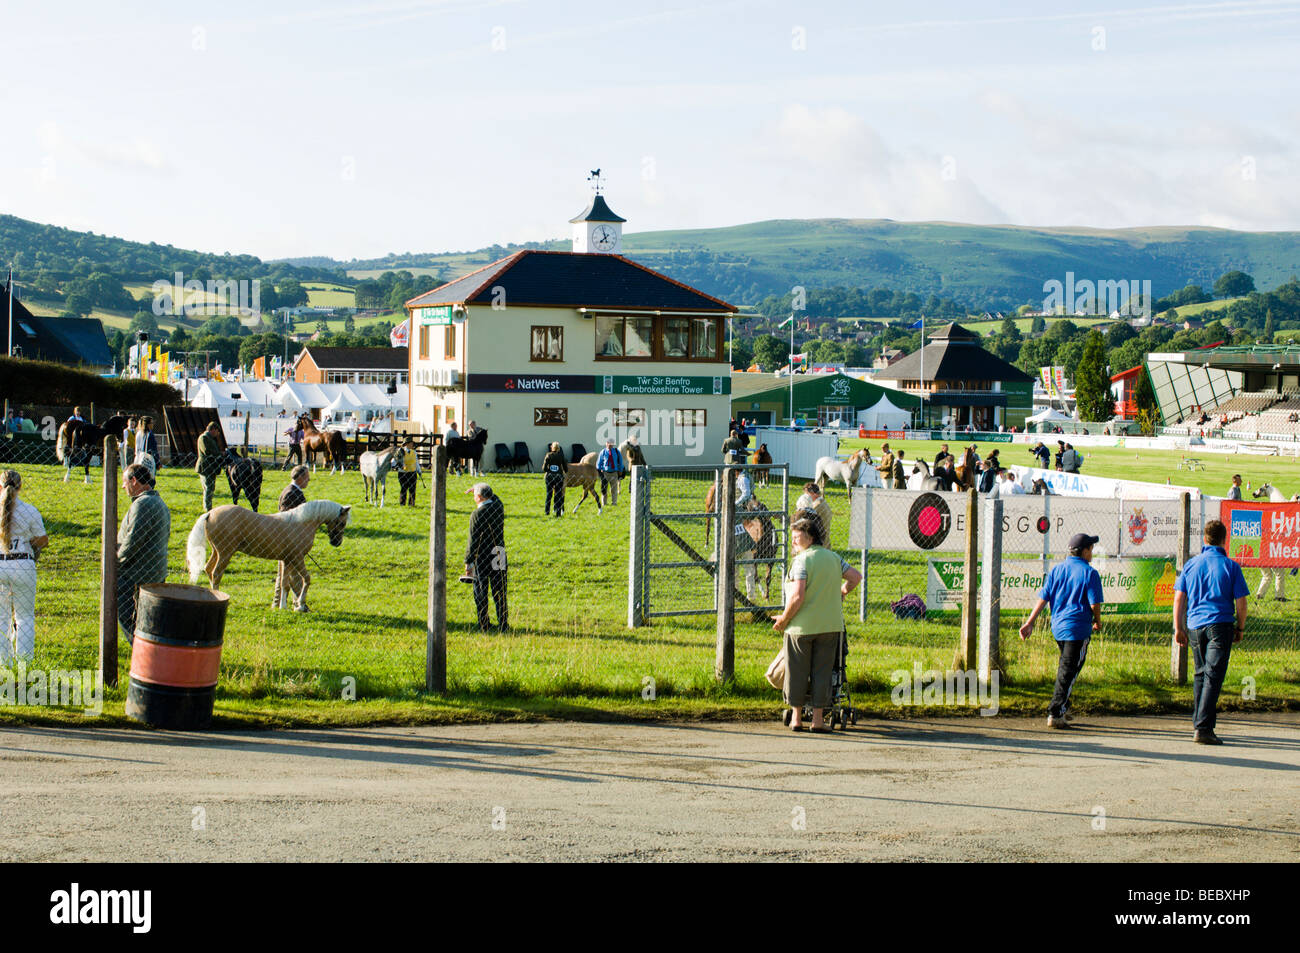 Preparing horses for judging at the Royal Welsh Show Stock Photo